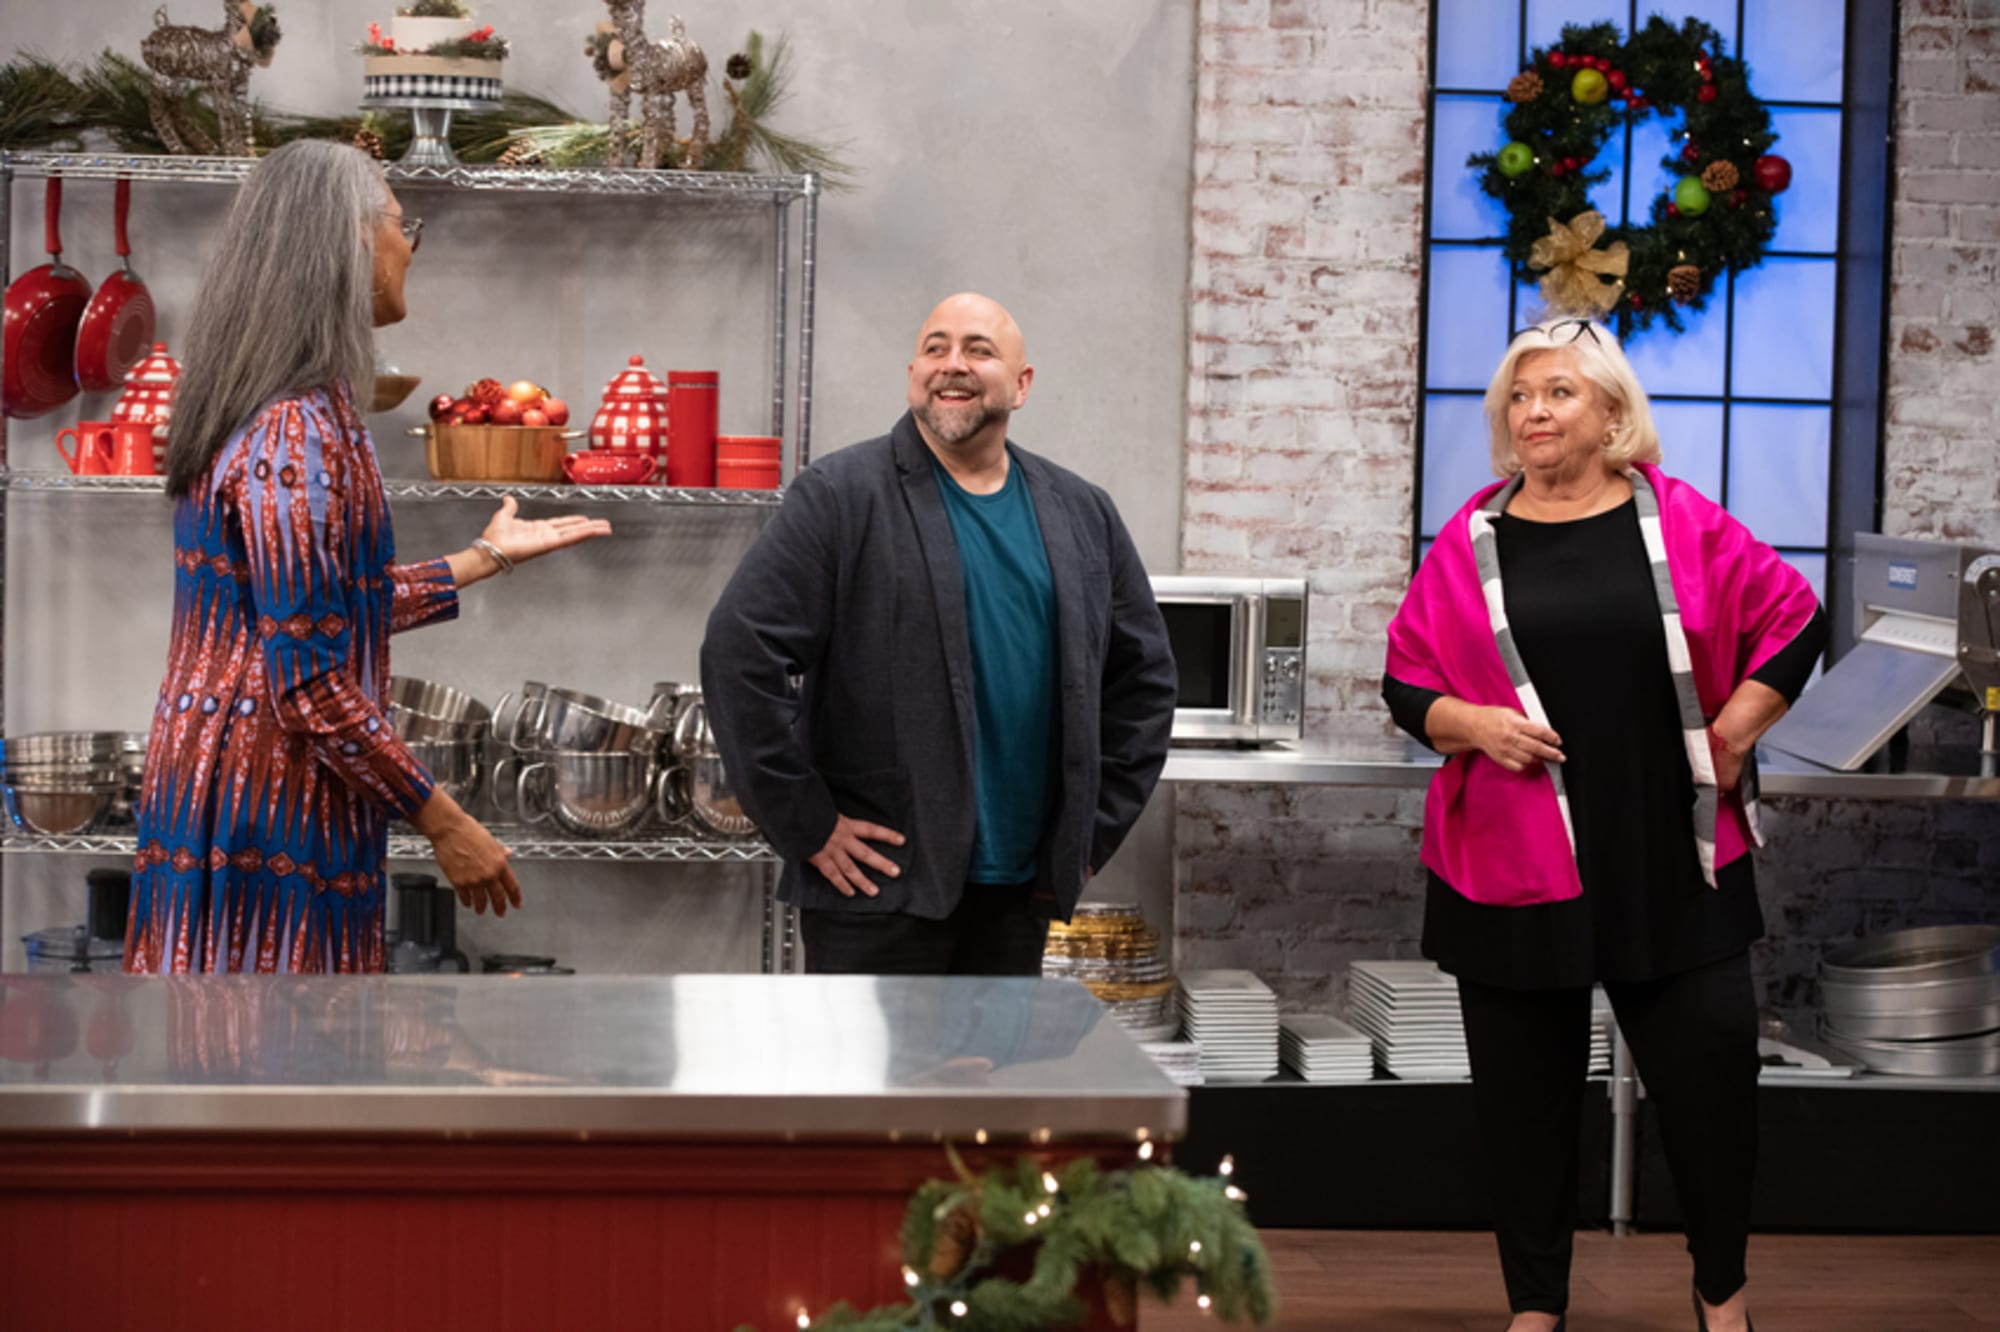 Holiday Baking Championship winner unwrapped the ultimate holiday gift